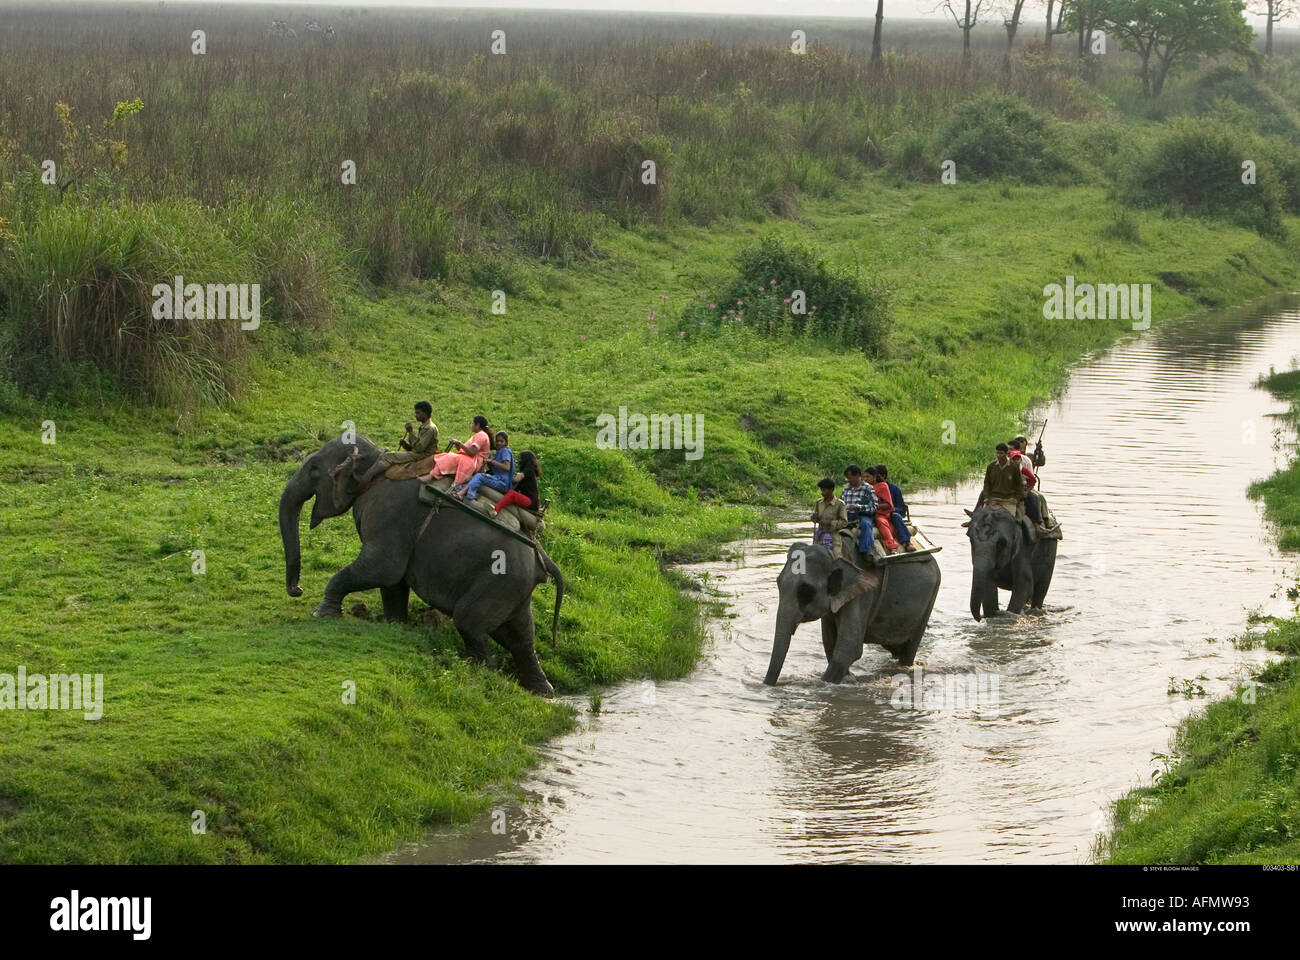 Group of people crossing a river on elephant back India Stock Photo